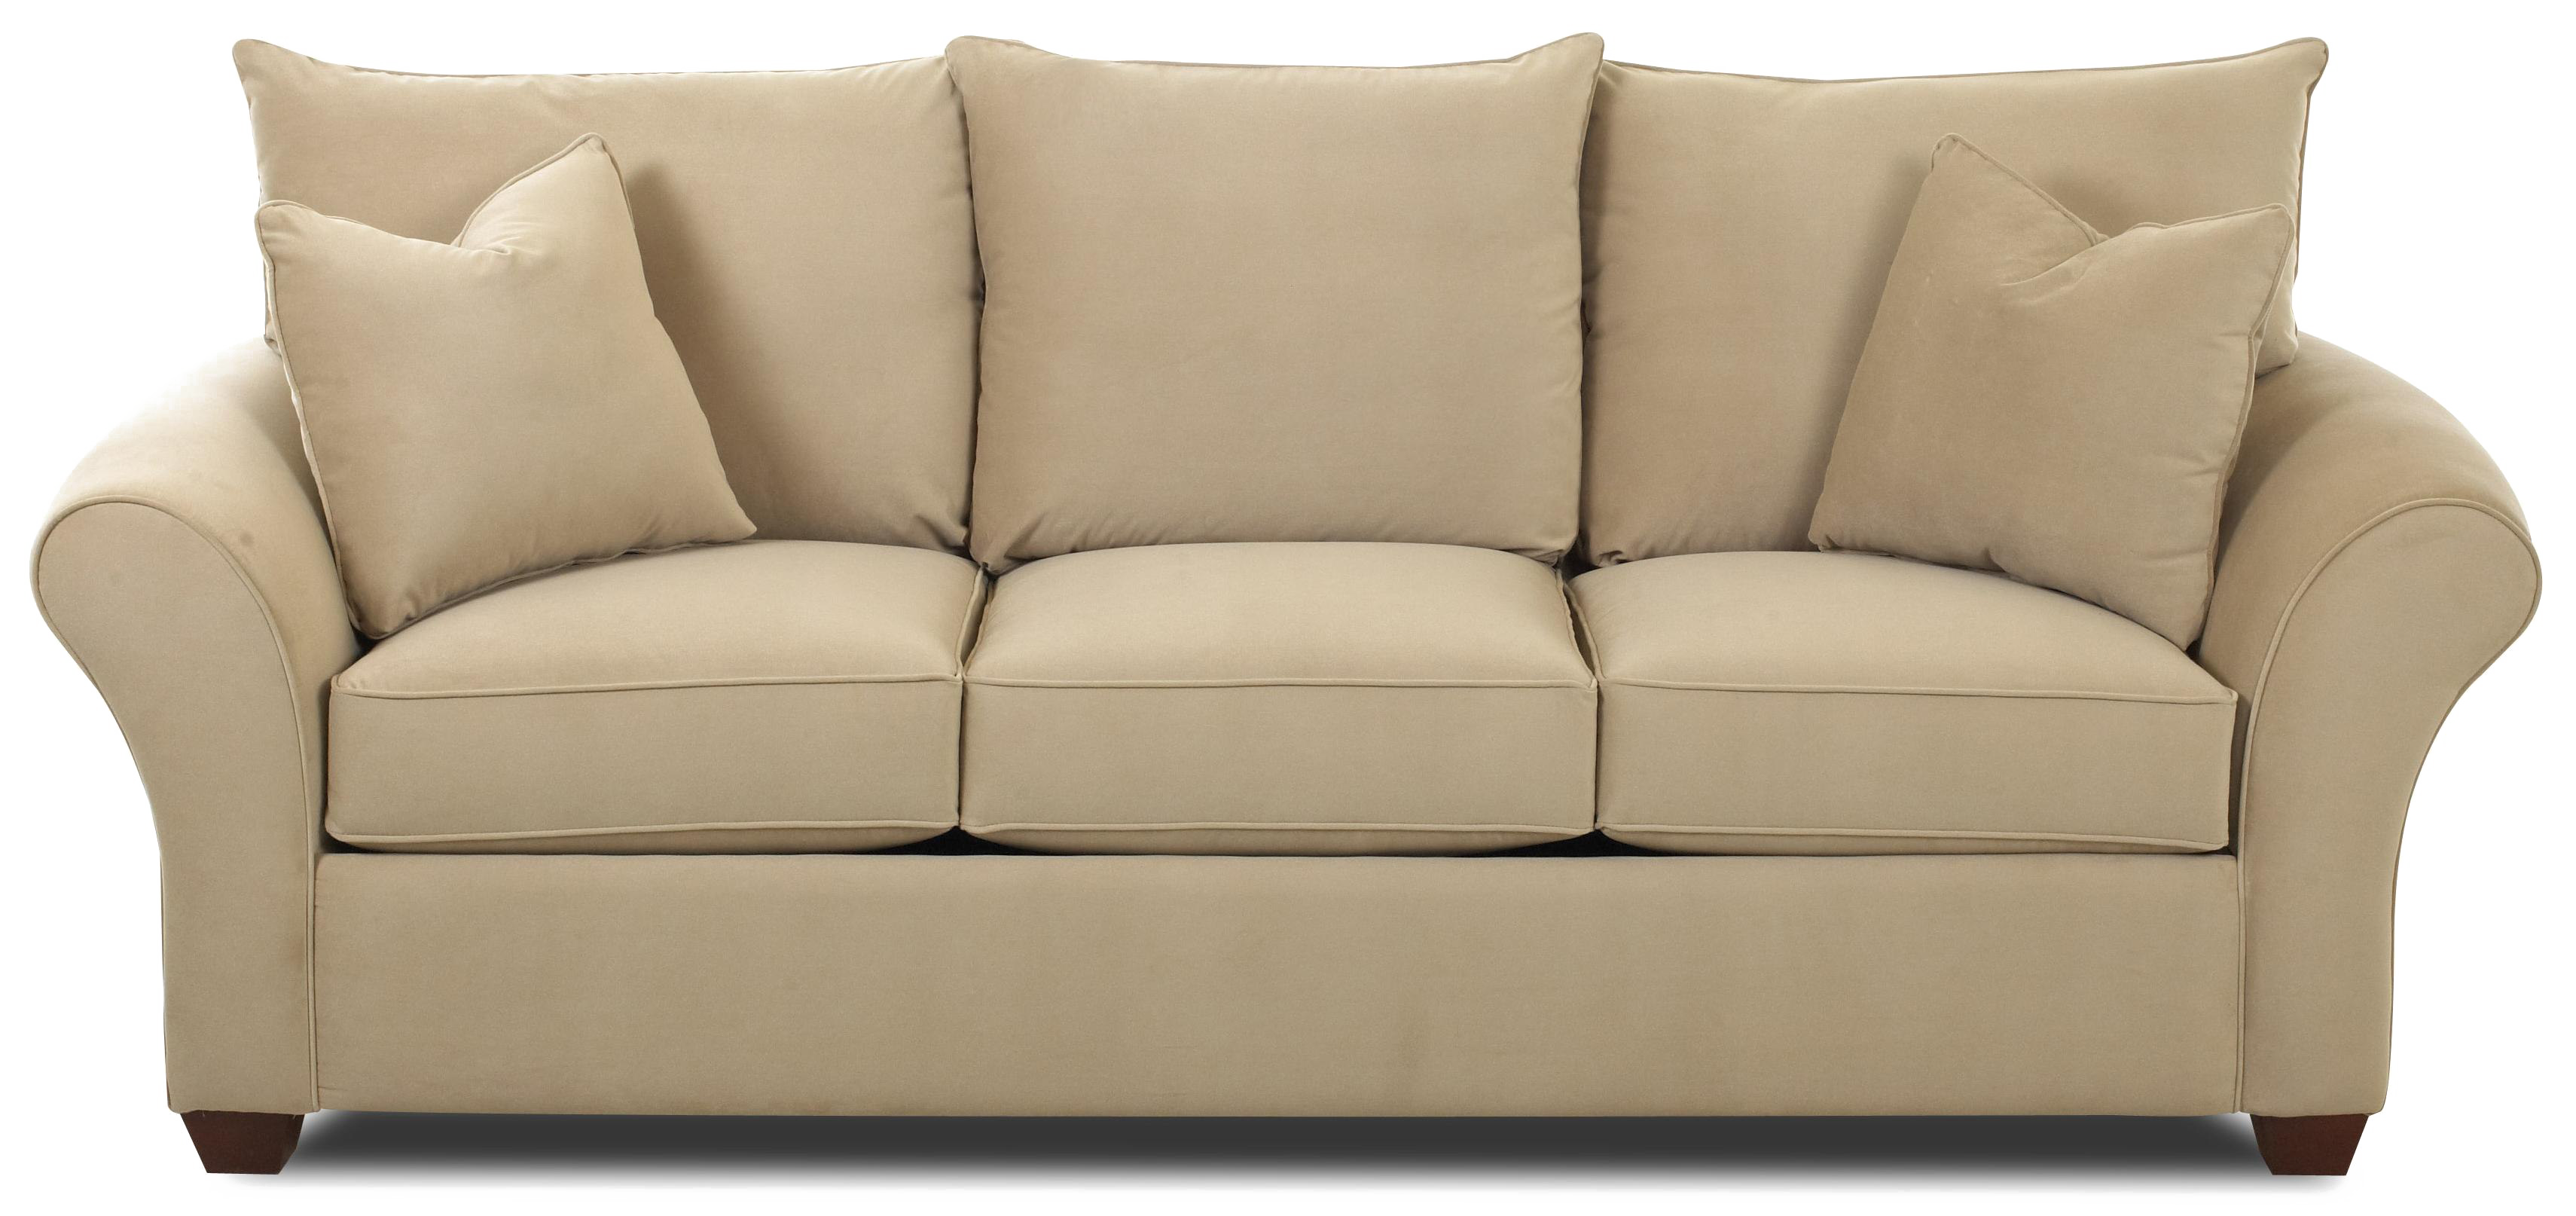 Sleeper Sofa Images PNG File HD PNG Image